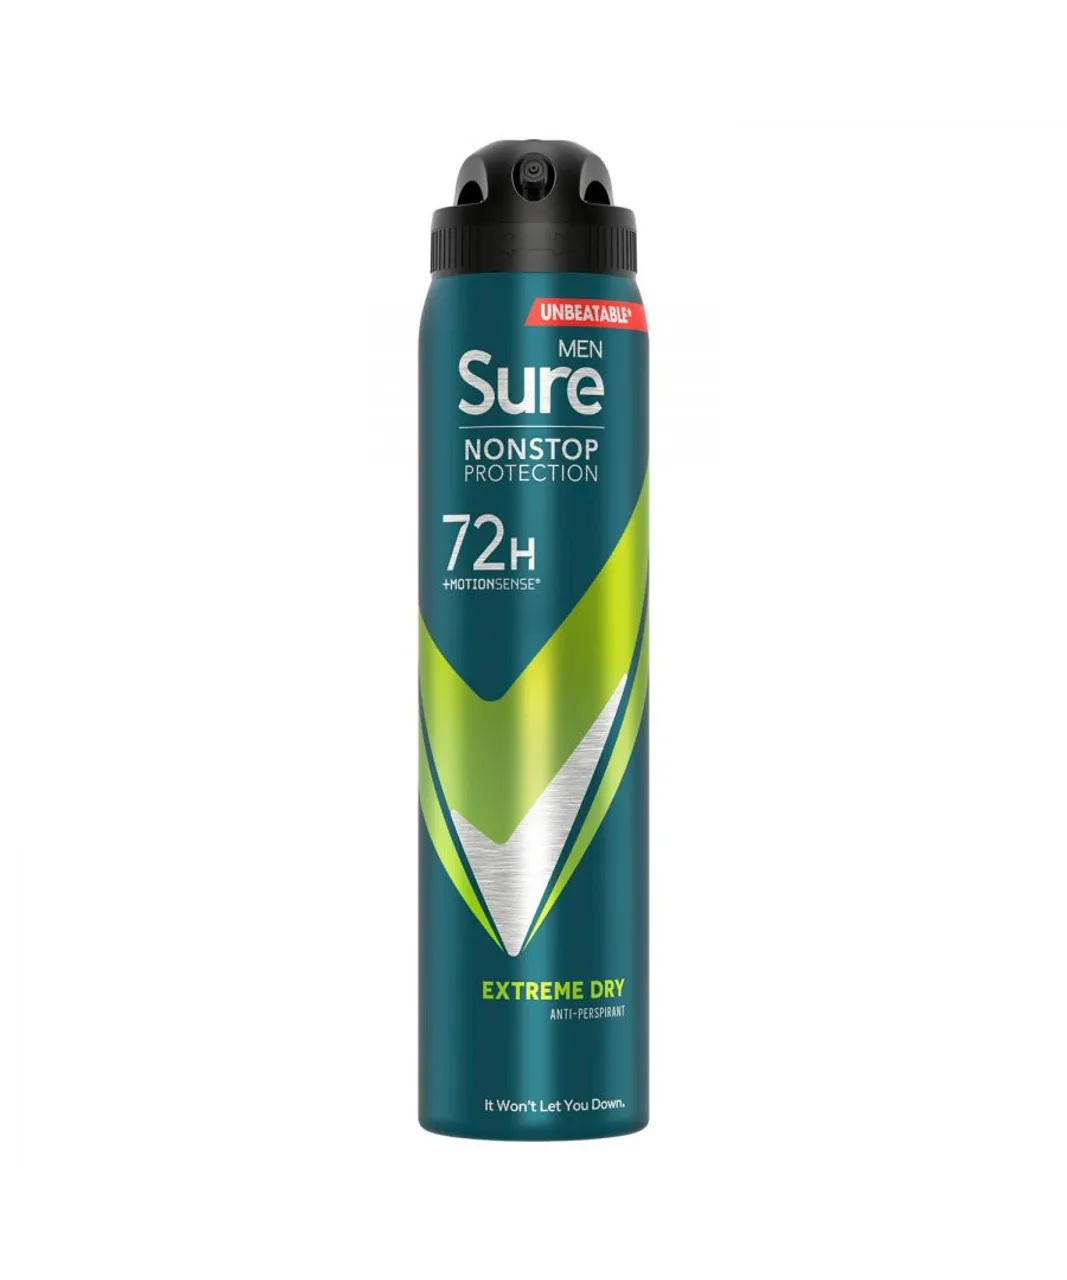 Sure Mens Men Anti-perspirant 72H Nonstop Protection Extreme Dry Deodorant 250ml, 3 Pack - NA - One Size